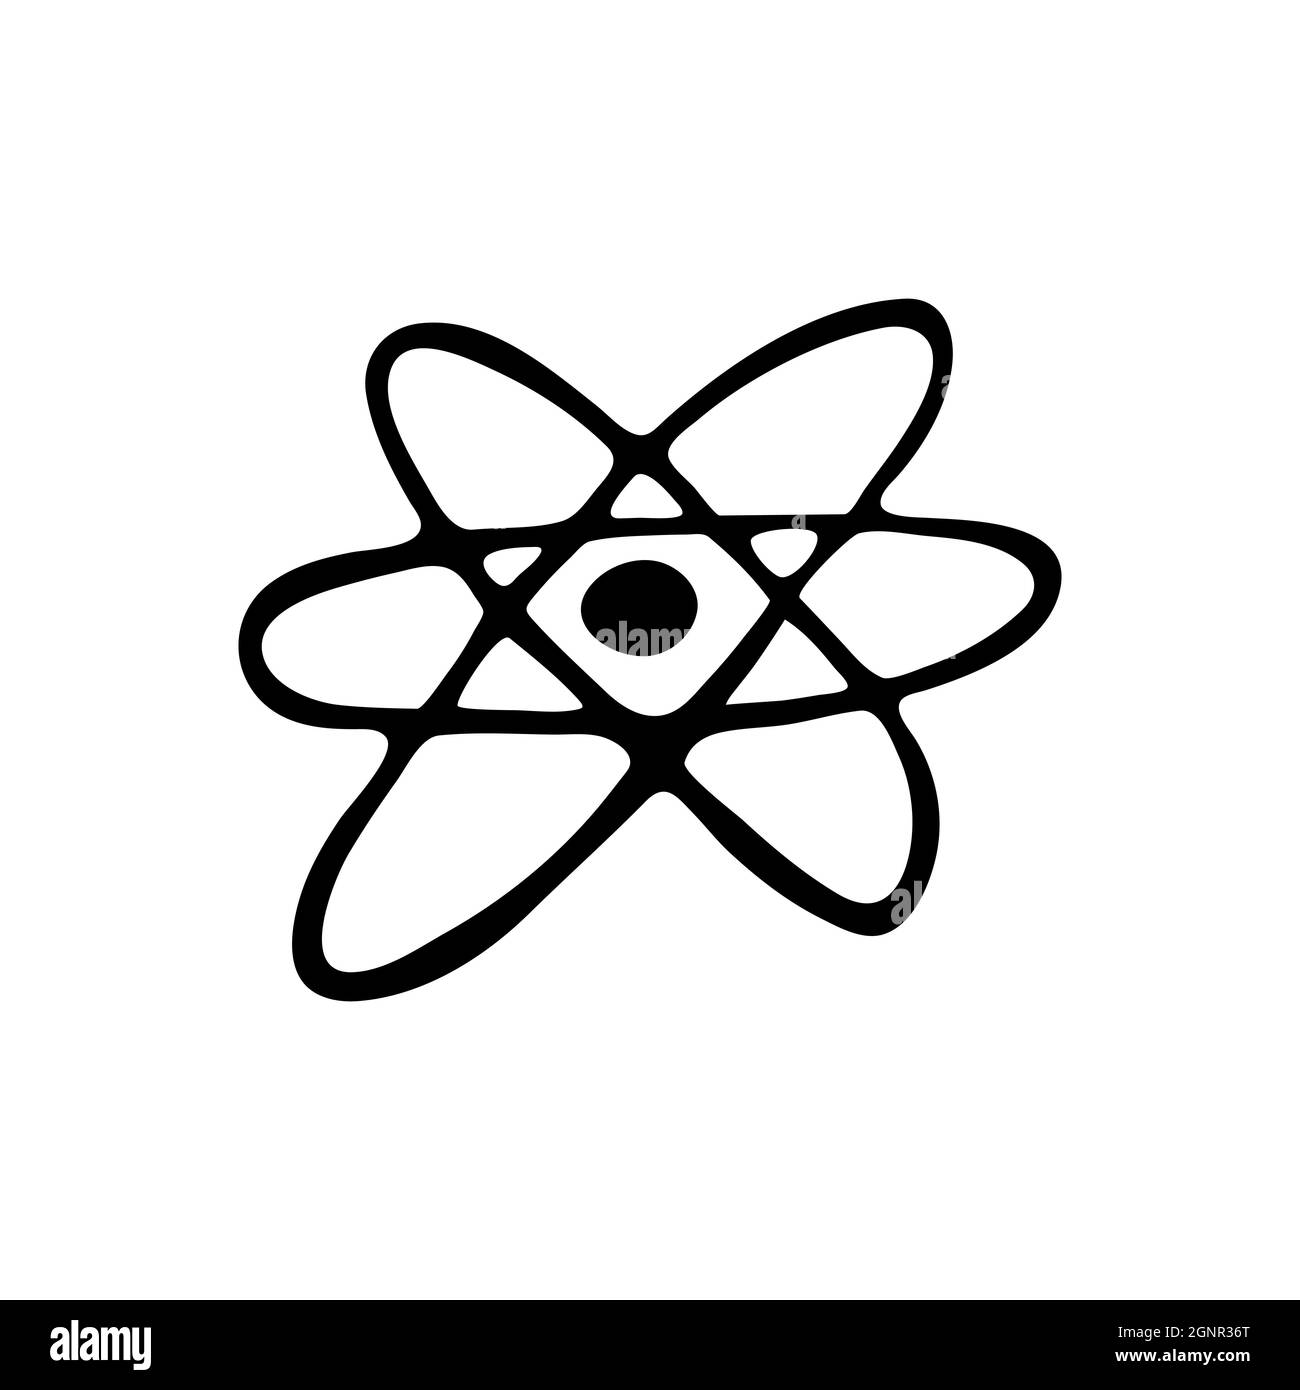 Hand drawn doodle style atom in vector. Isolated illustration on white background. For interior design, wallpaper, packaging, poster Stock Vector